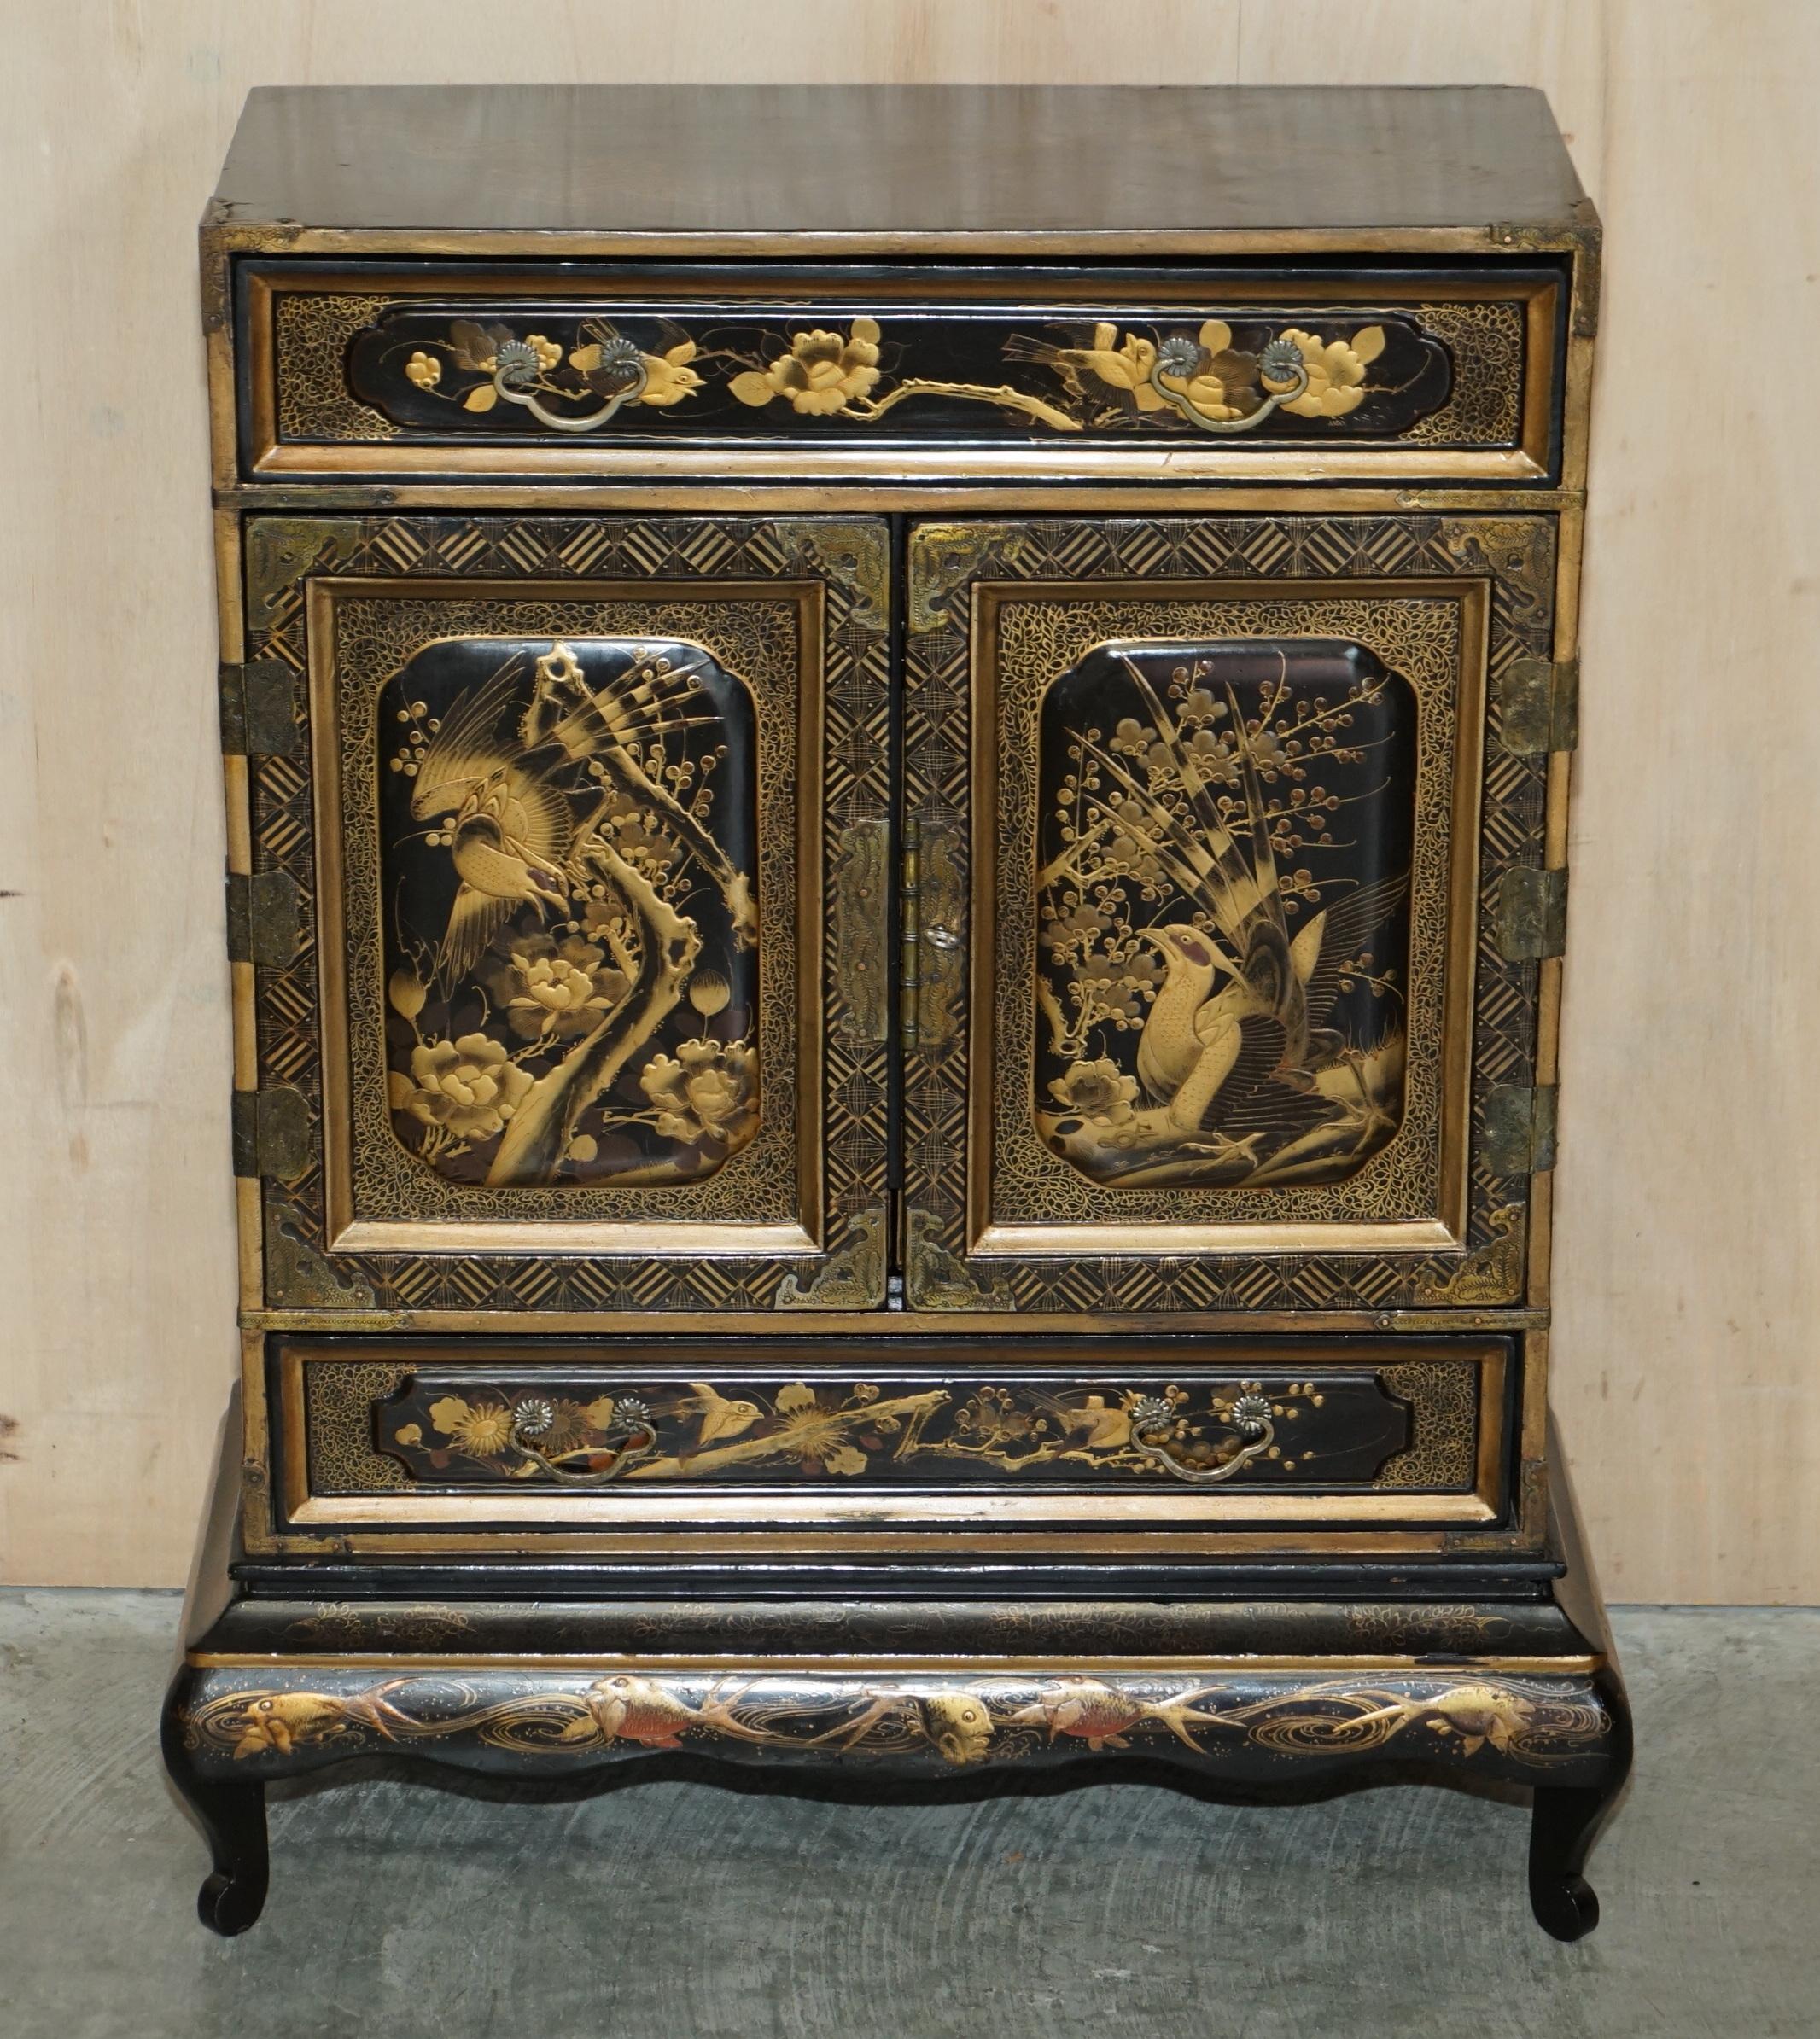 Lacquered Rare Oriental Chinese Export Antique Cabinet Lots of Drawers for Fine Teas